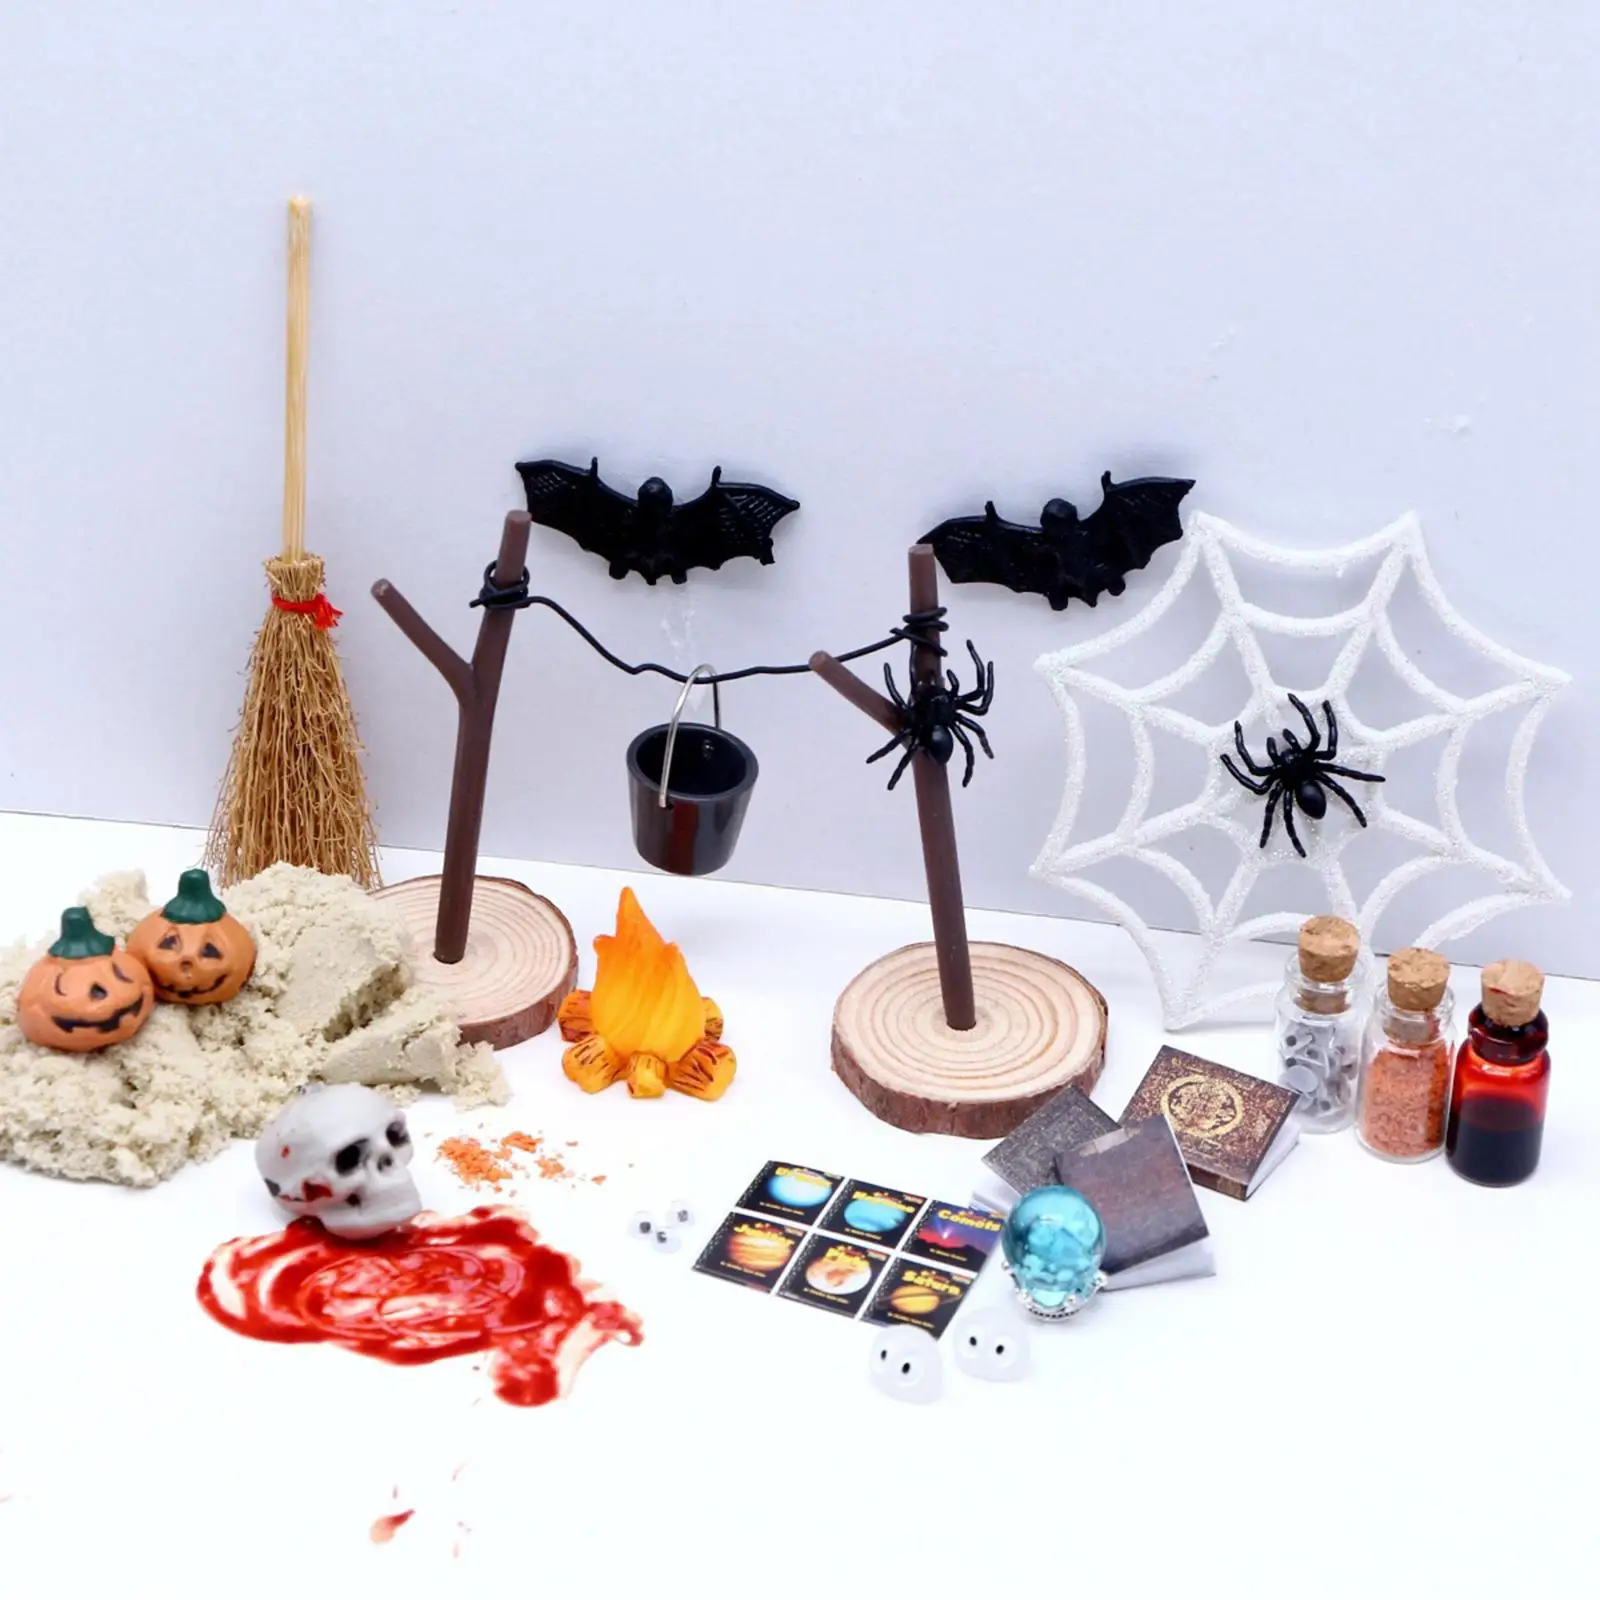 27x Dollhouse Halloween Miniature Ornament Toy Projects Pretend Play Miniature Halloween Scene for Home Room Party Bedroom